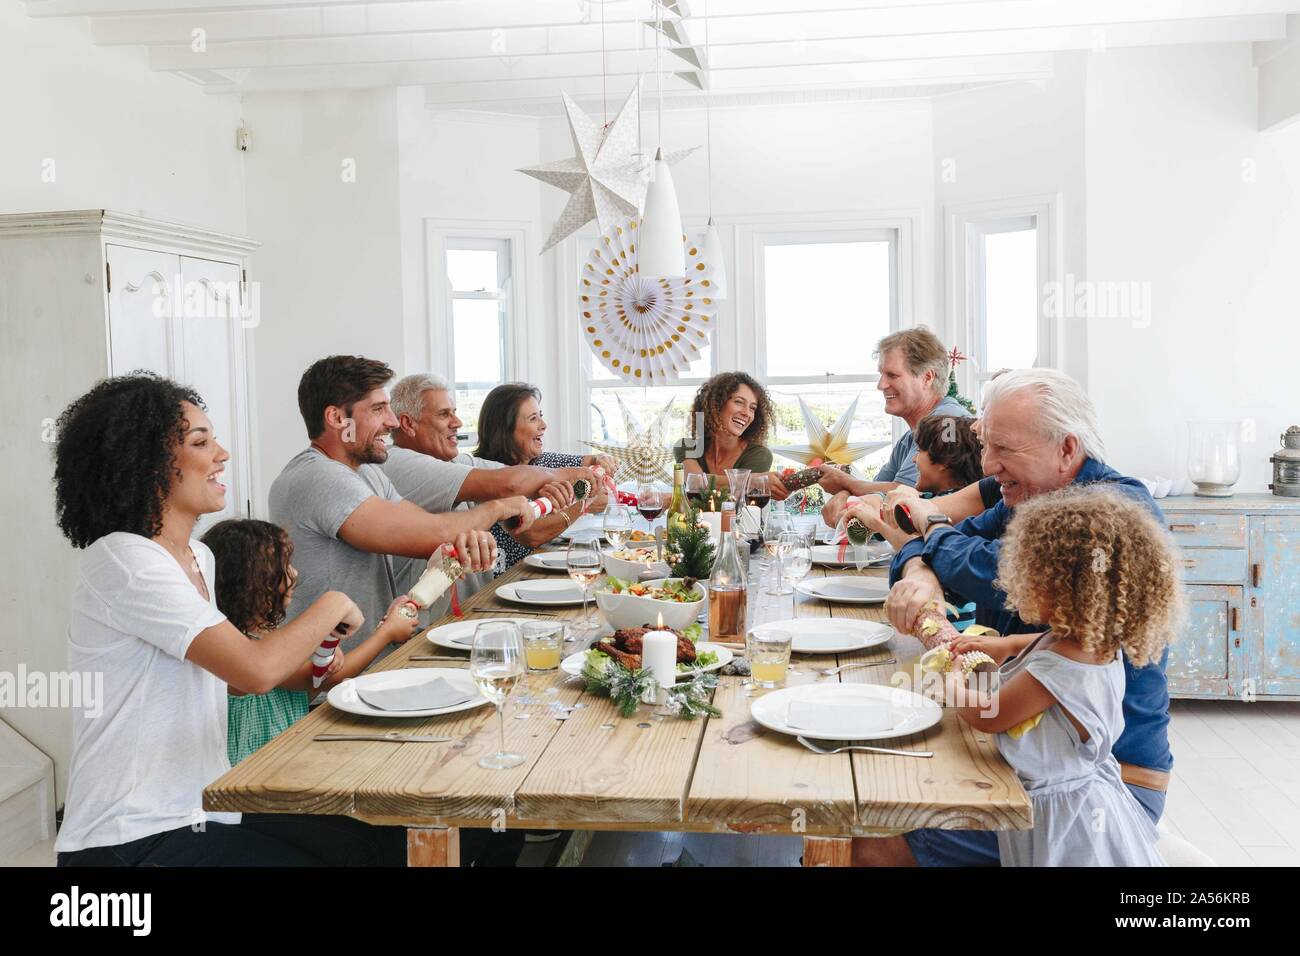 Family popping Christmas crackers together at dining table Stock Photo